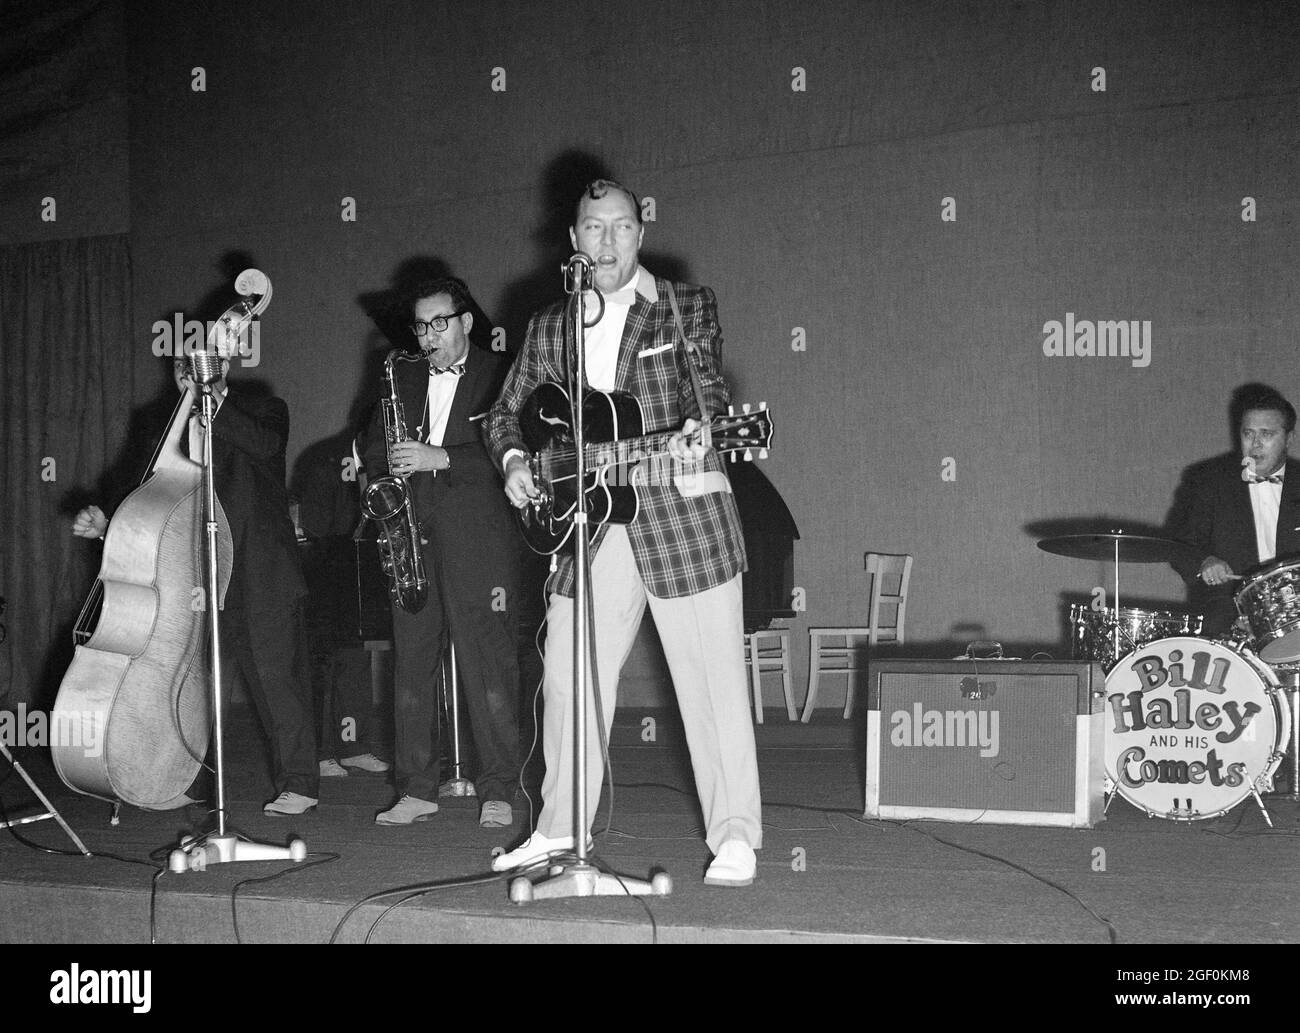 November 1958, Bill Haley and his Comets performing on stage, Rudy Pompilli saxophone, Ralph Jones drummer, Strasbourg, Alsace, France, Europe, Stock Photo